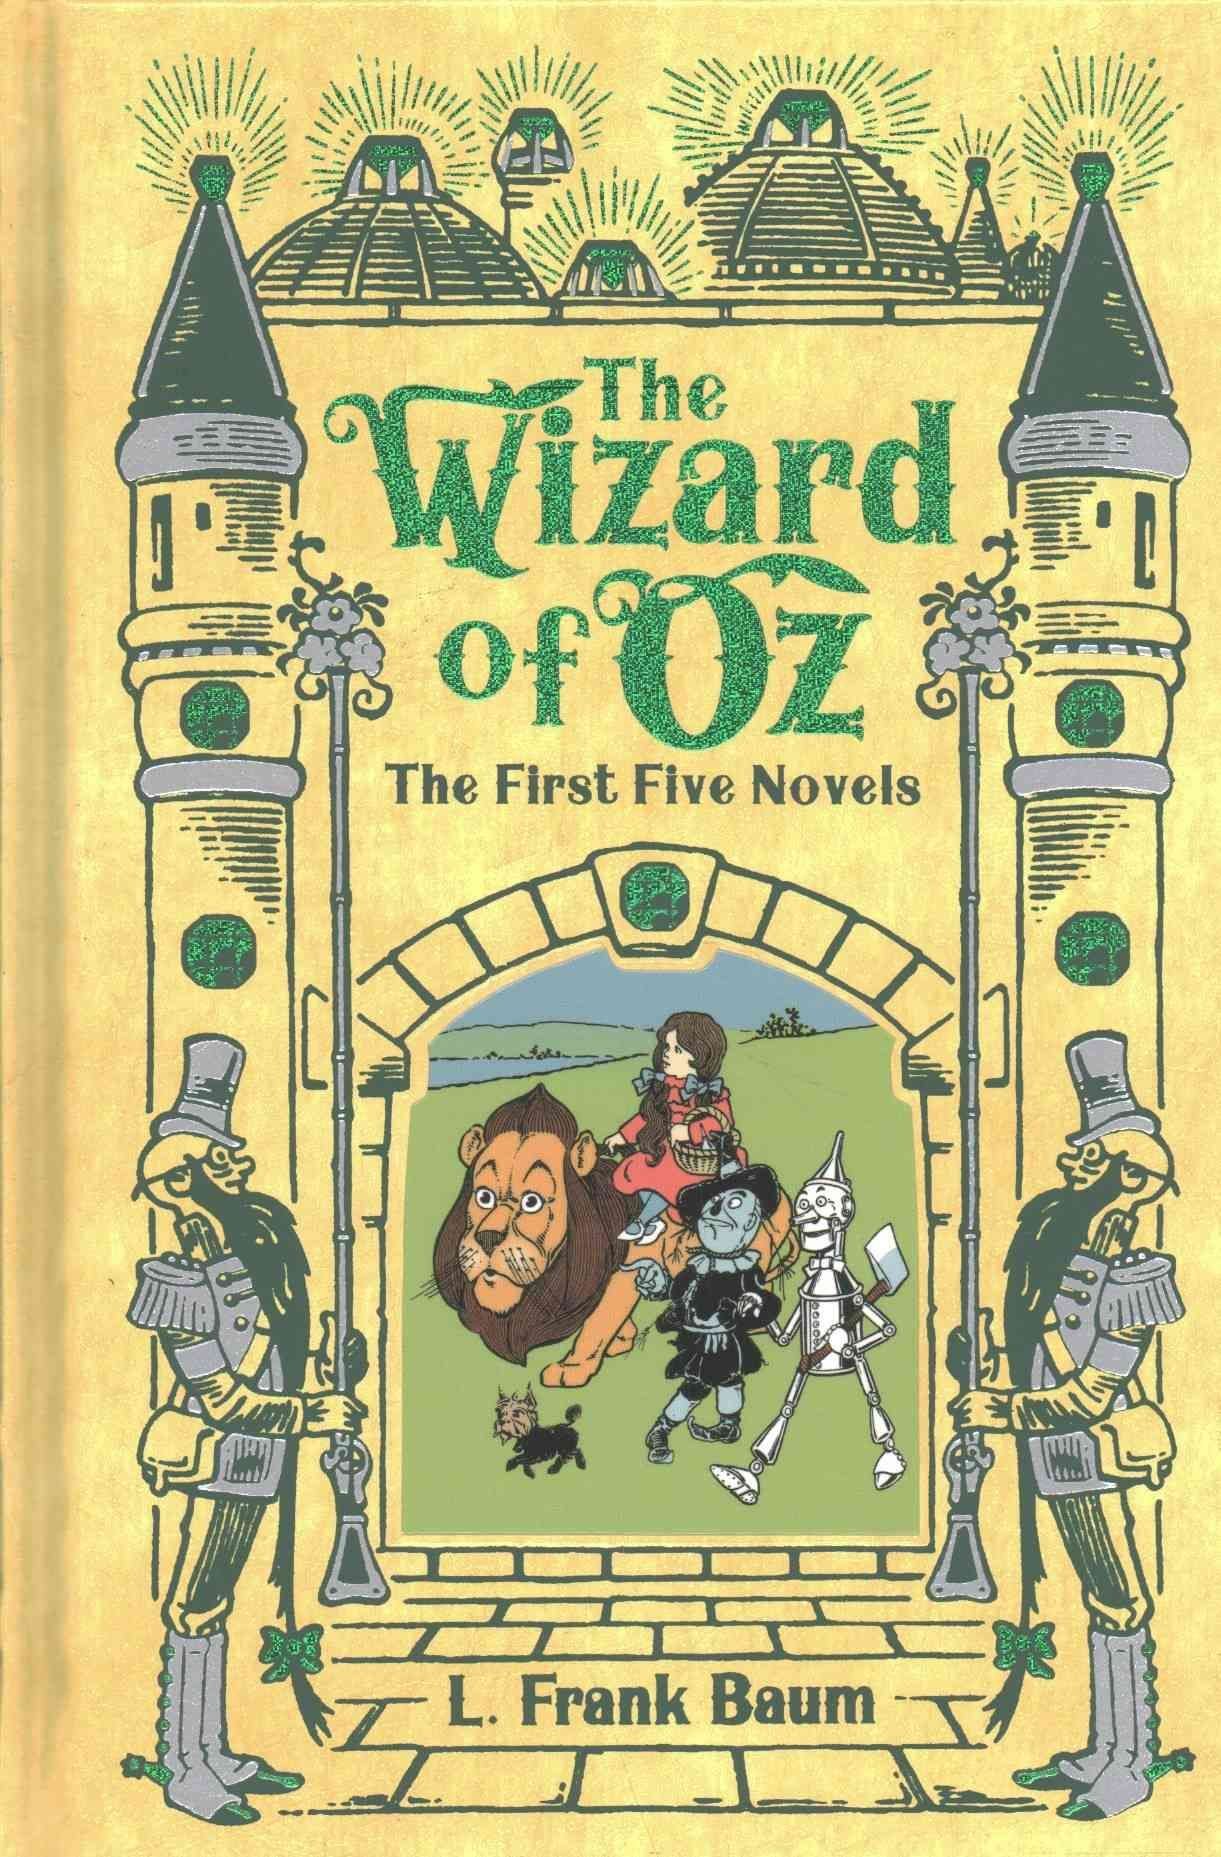 The Wizard of Oz: Five alternative readings